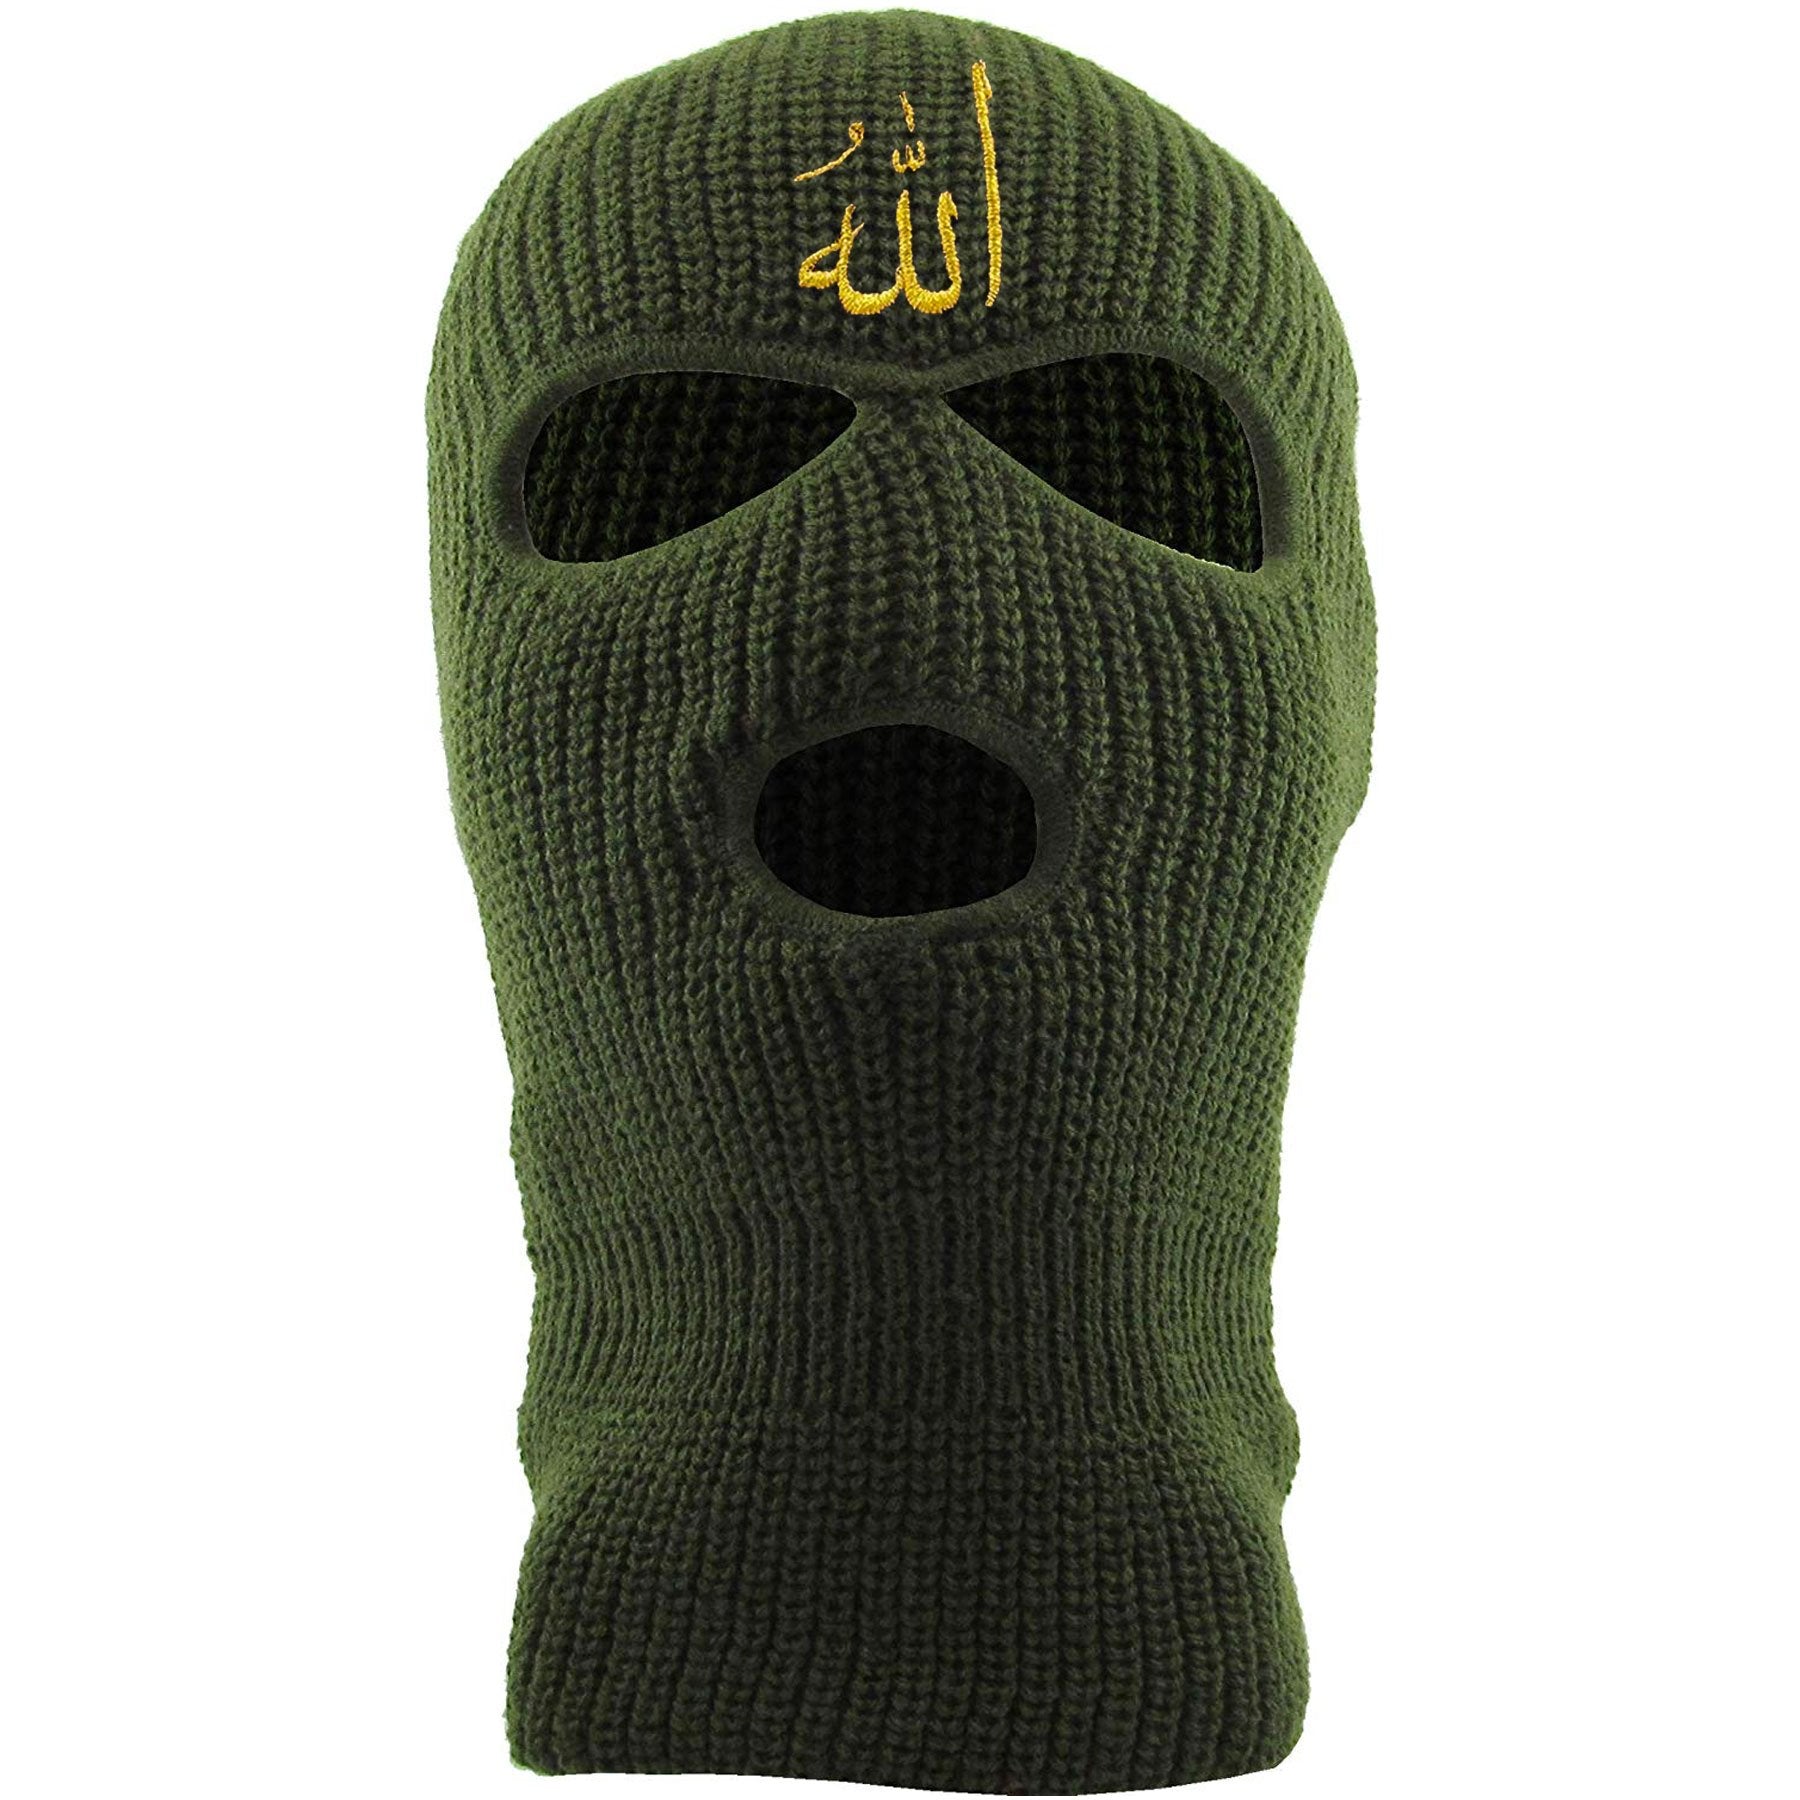 Embroidered on the front of the olive Allah ski mask is the arabic writing for the word allah